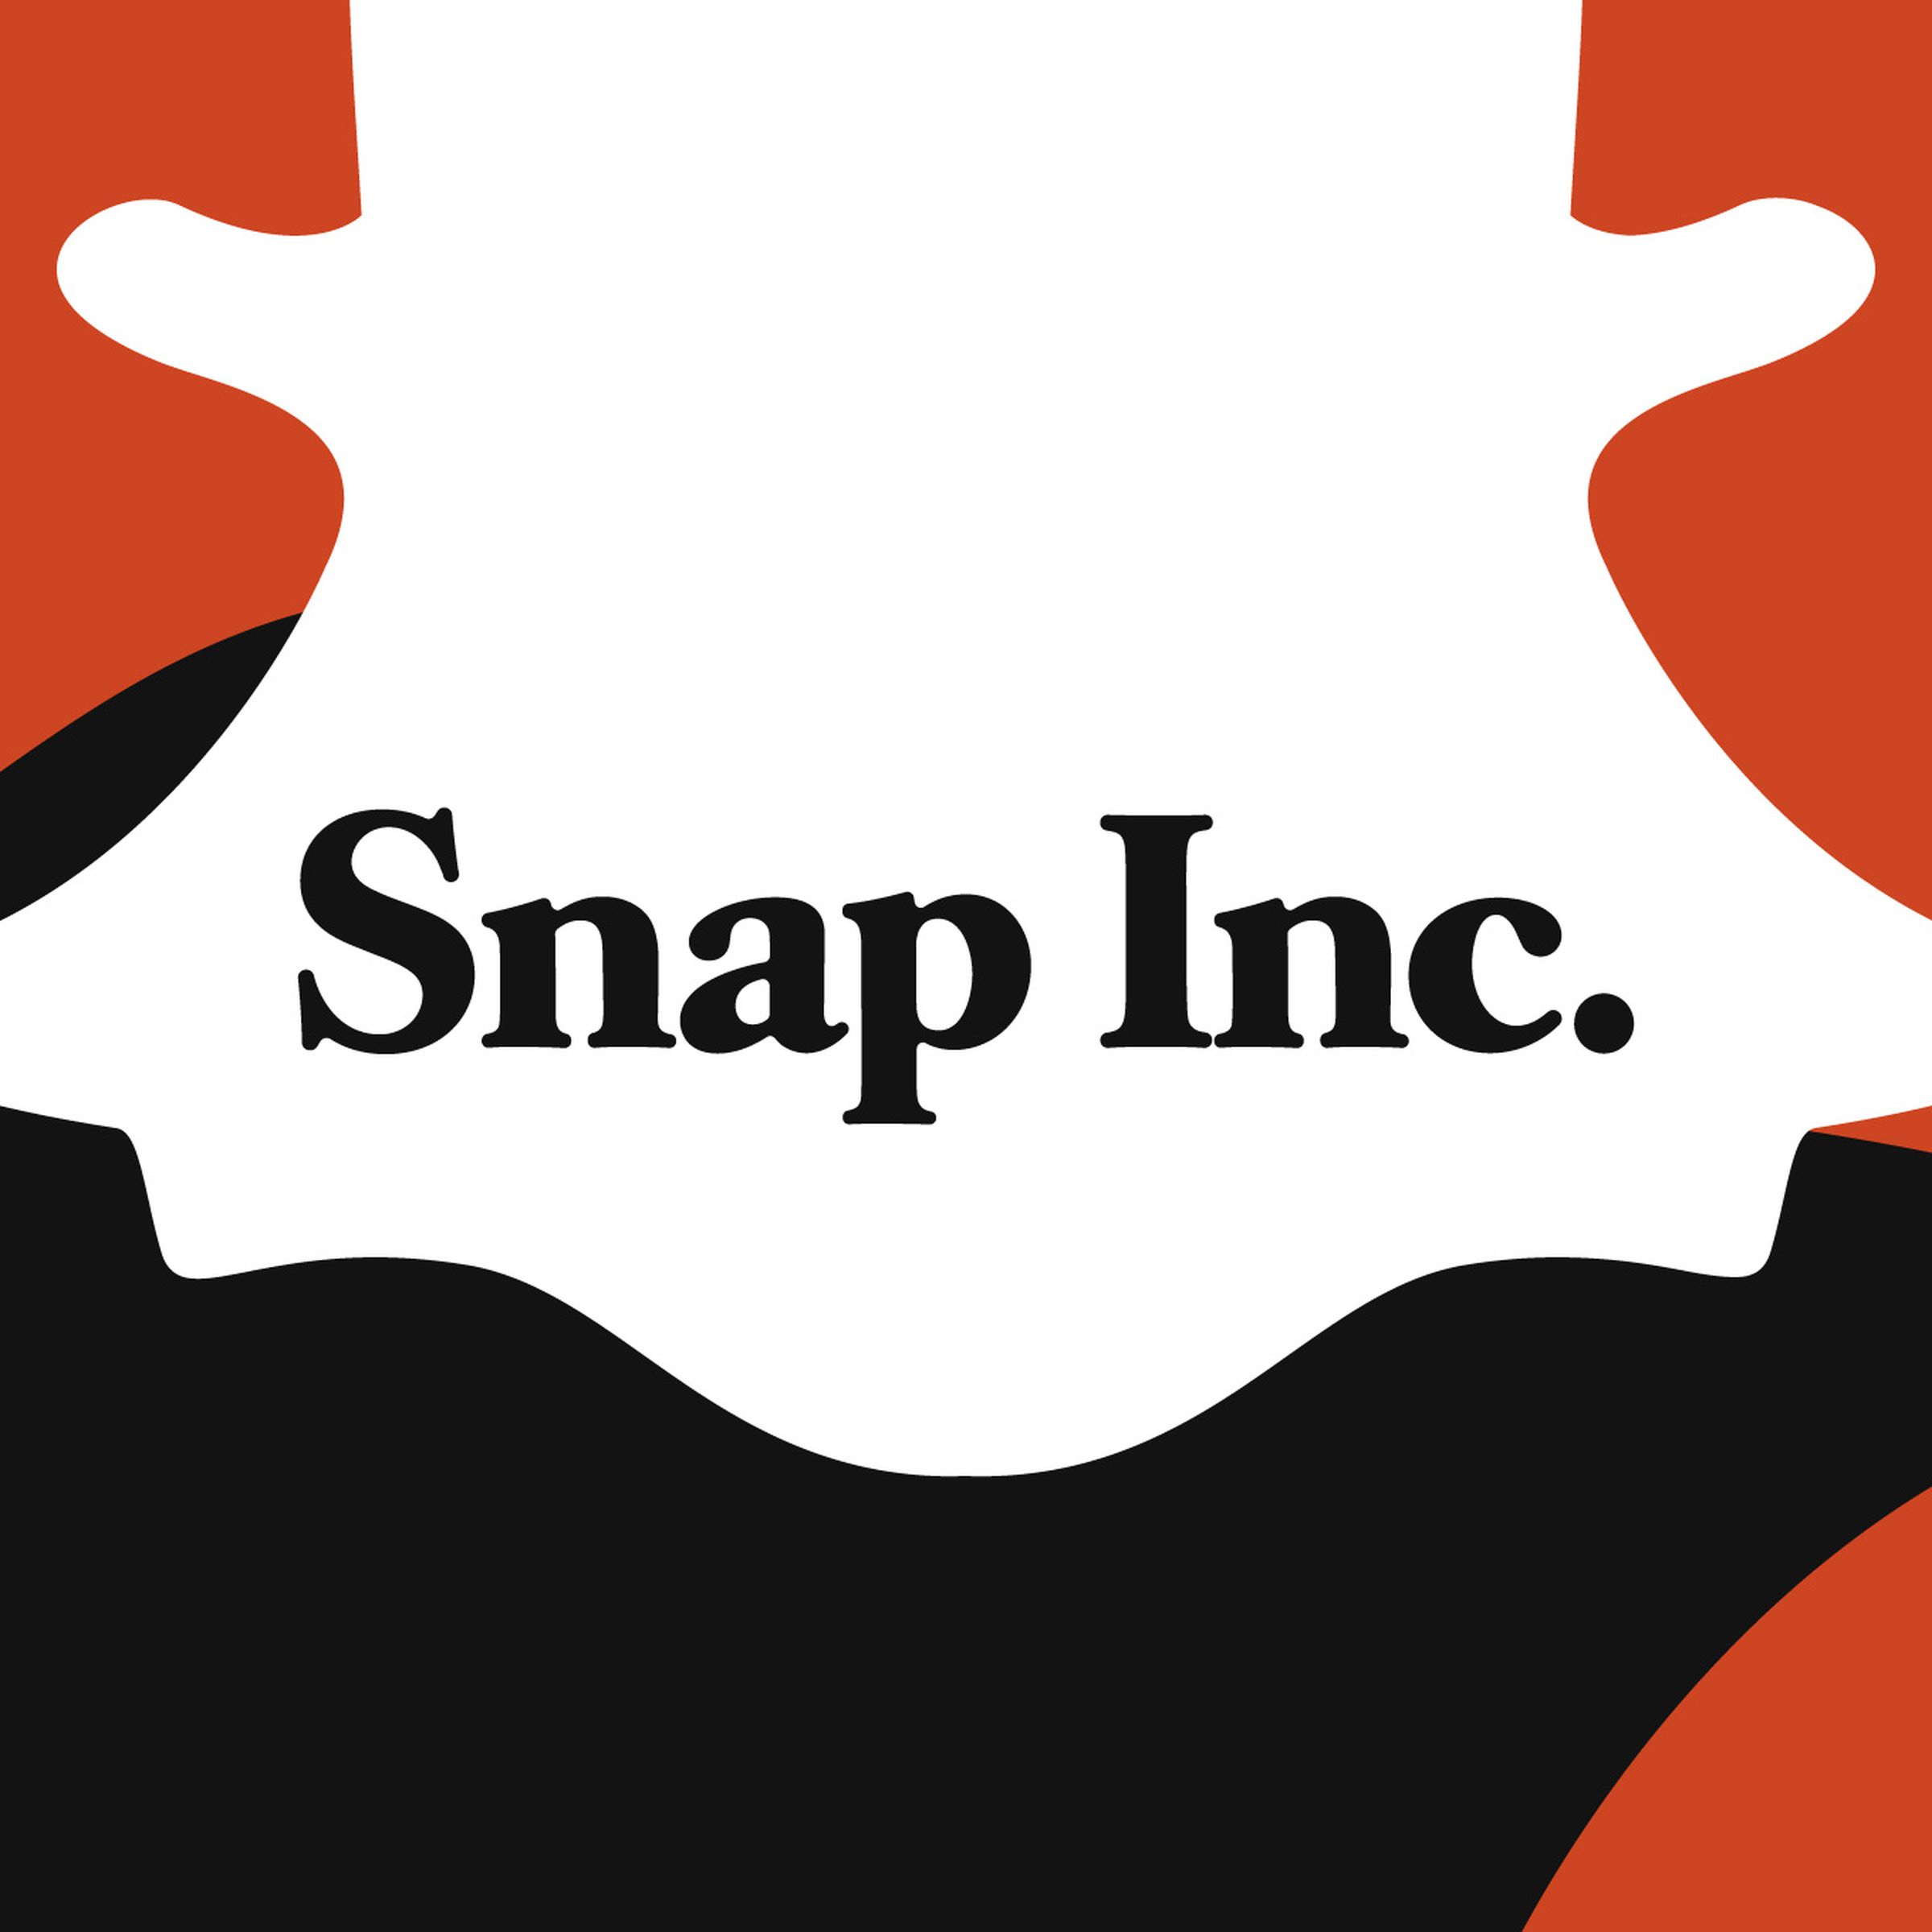 The Snapchat ghost icon in white, on a rust red and black background